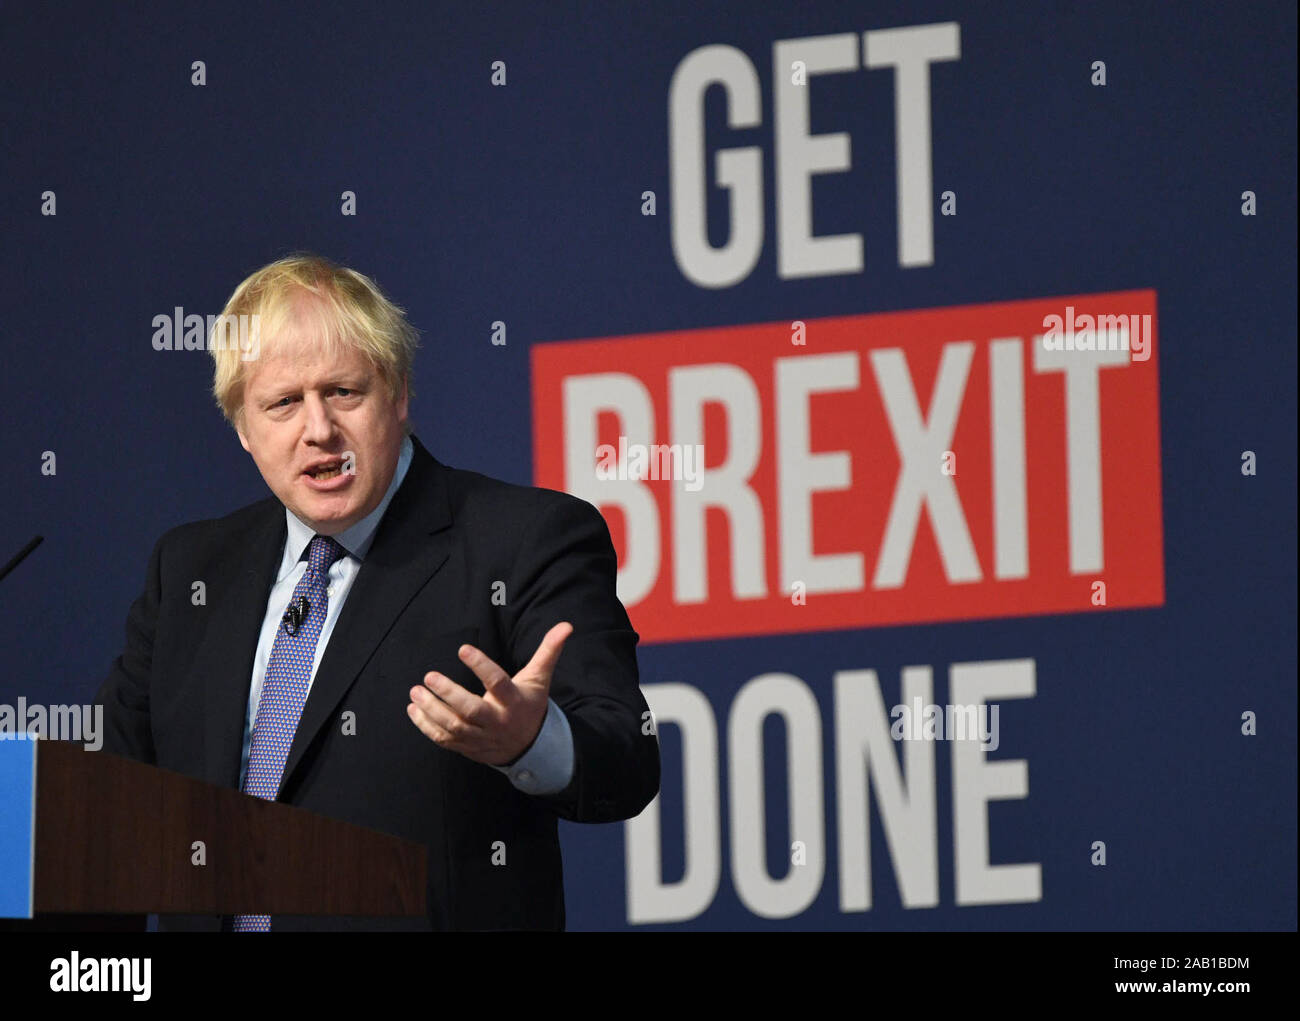 Telford. 24th Nov, 2019. British Prime Minister Boris Johnson delivers a speech at the launch of the Conservative Party election manifesto in Telford, Britain on Nov. 24, 2019. British Prime Minister Boris Johnson launched the Conservative Party's election manifesto Sunday, promising to put his 'Get Brexit Done' deal before parliament ahead of Christmas recess. Credit: Xinhua/Alamy Live News Stock Photo